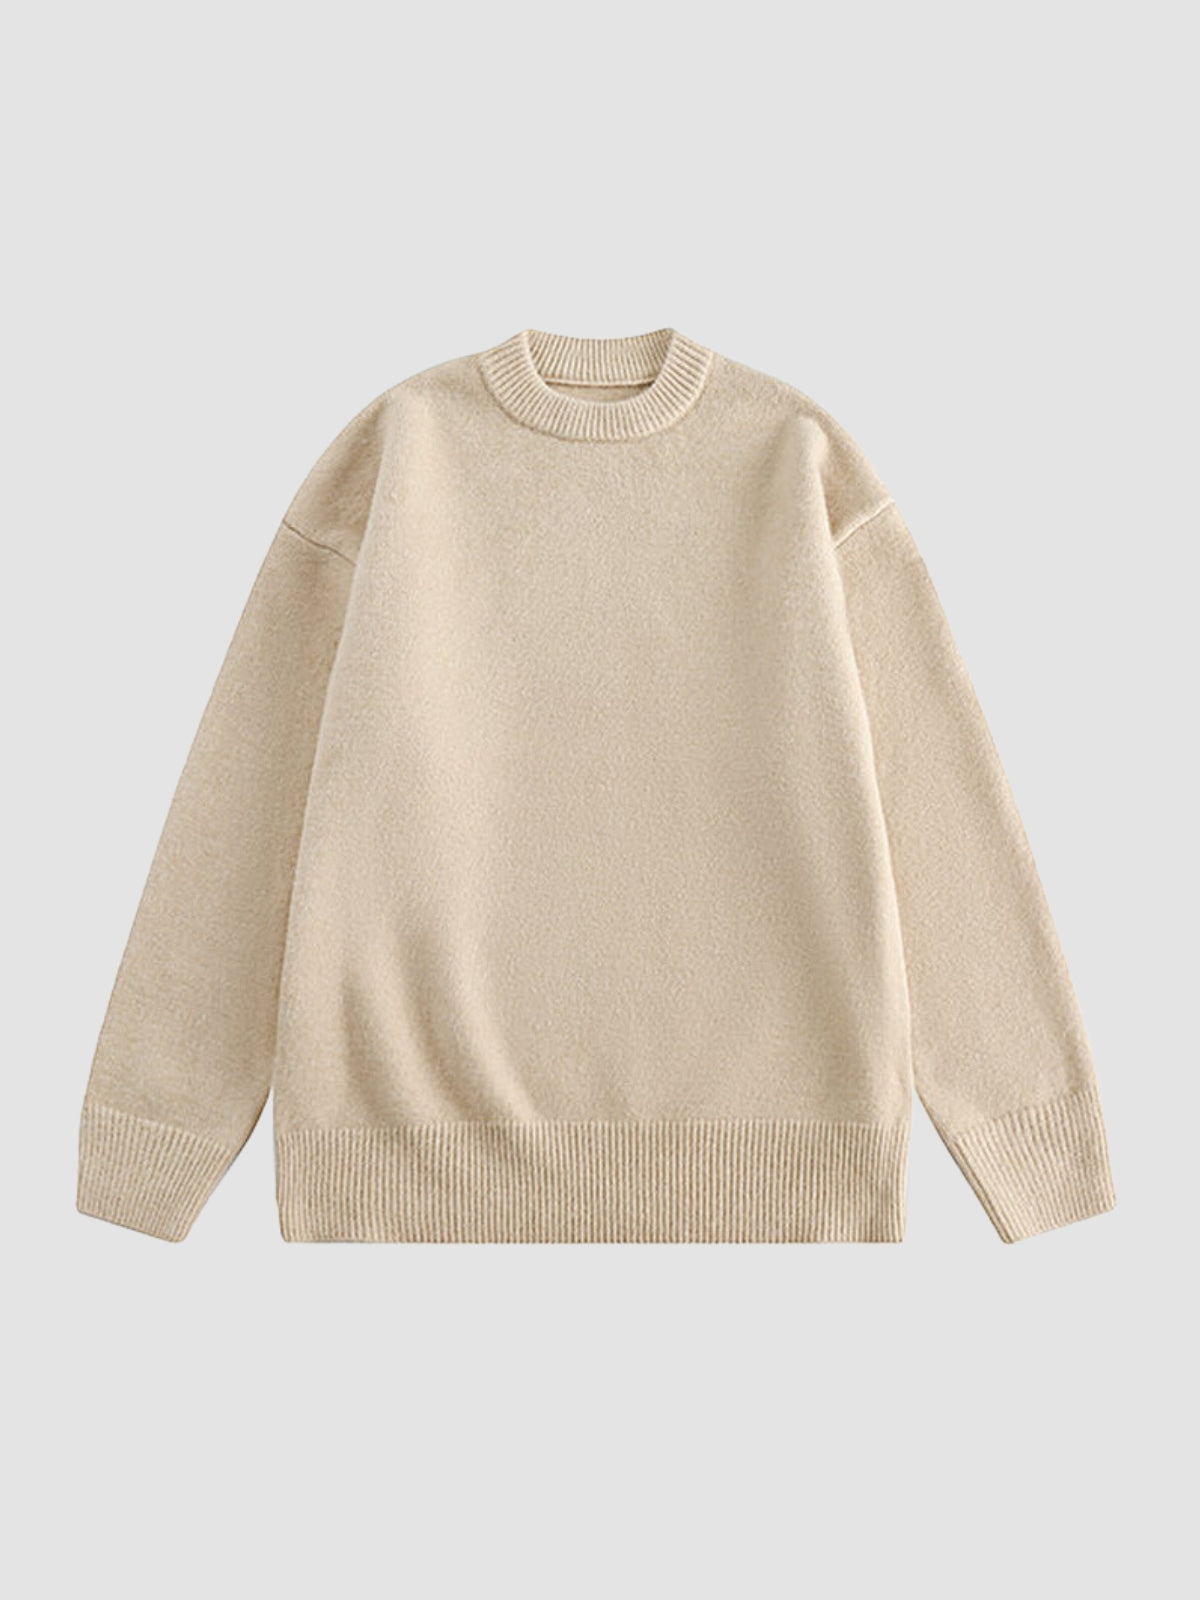 We Love Street Retro Solid Pullover Sweater